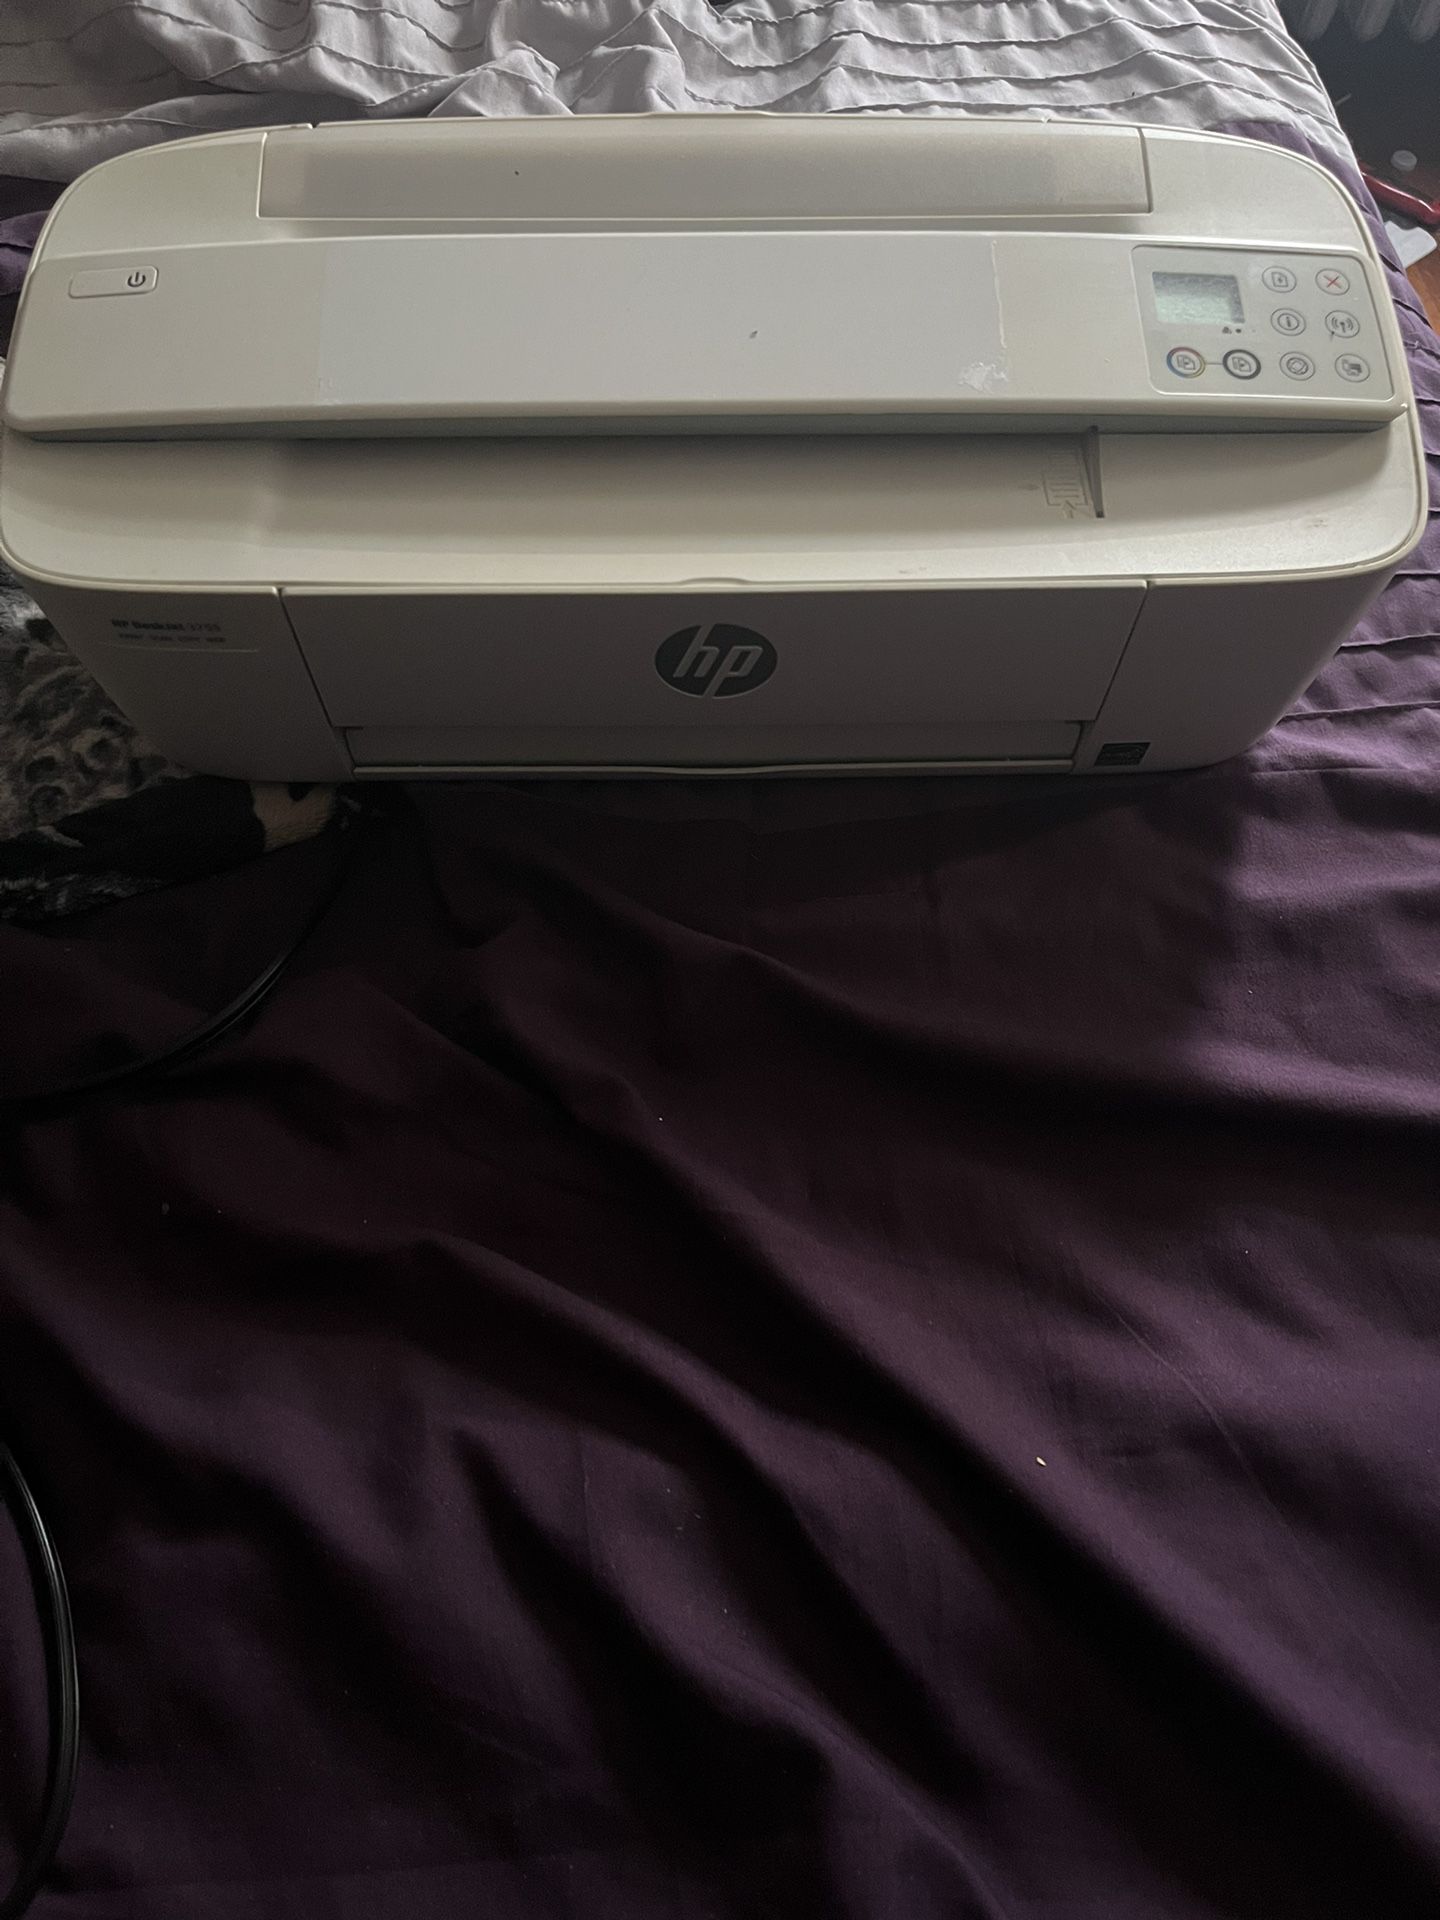 Versacheck Printer With Extra Paper 